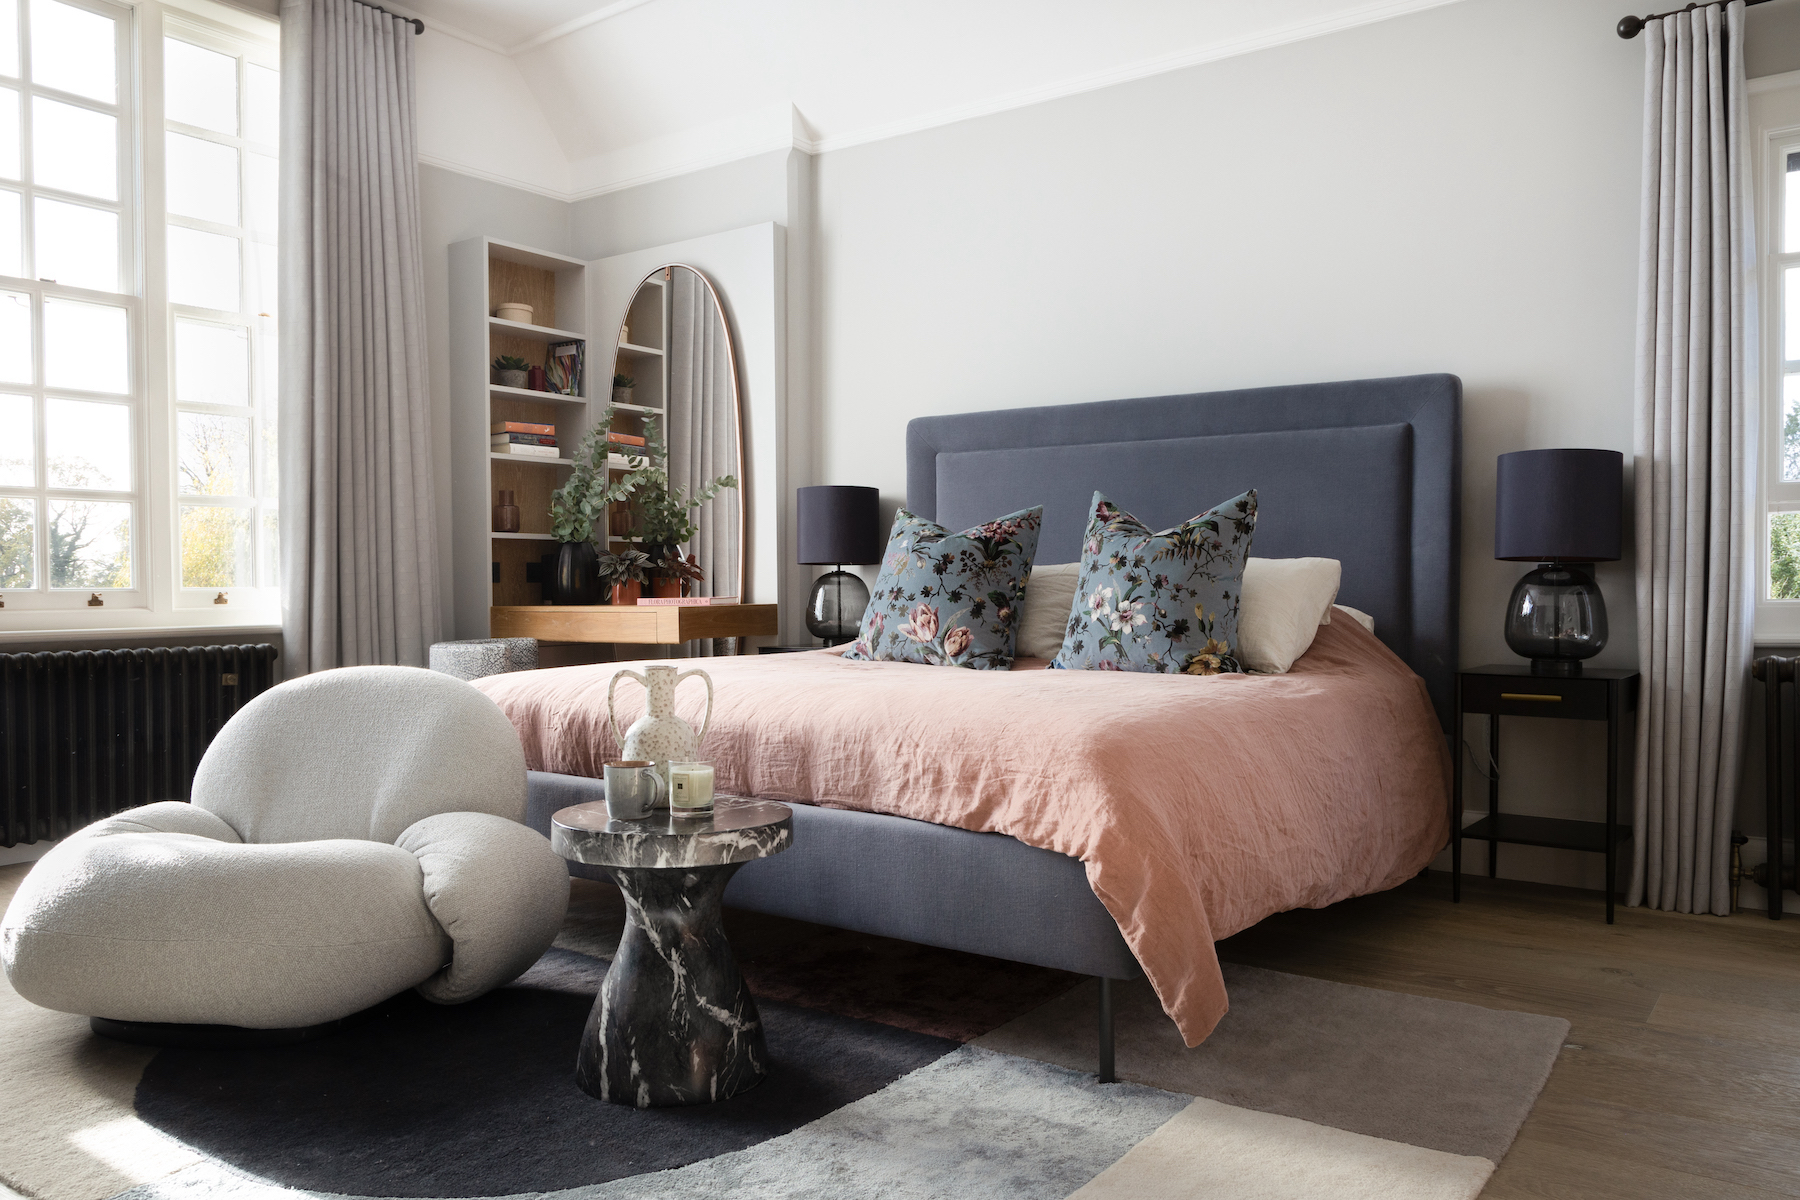 Master Bedroom with Bespoke Upholstery and Joinery Work. Soft calming palette of pinks and neutrals.